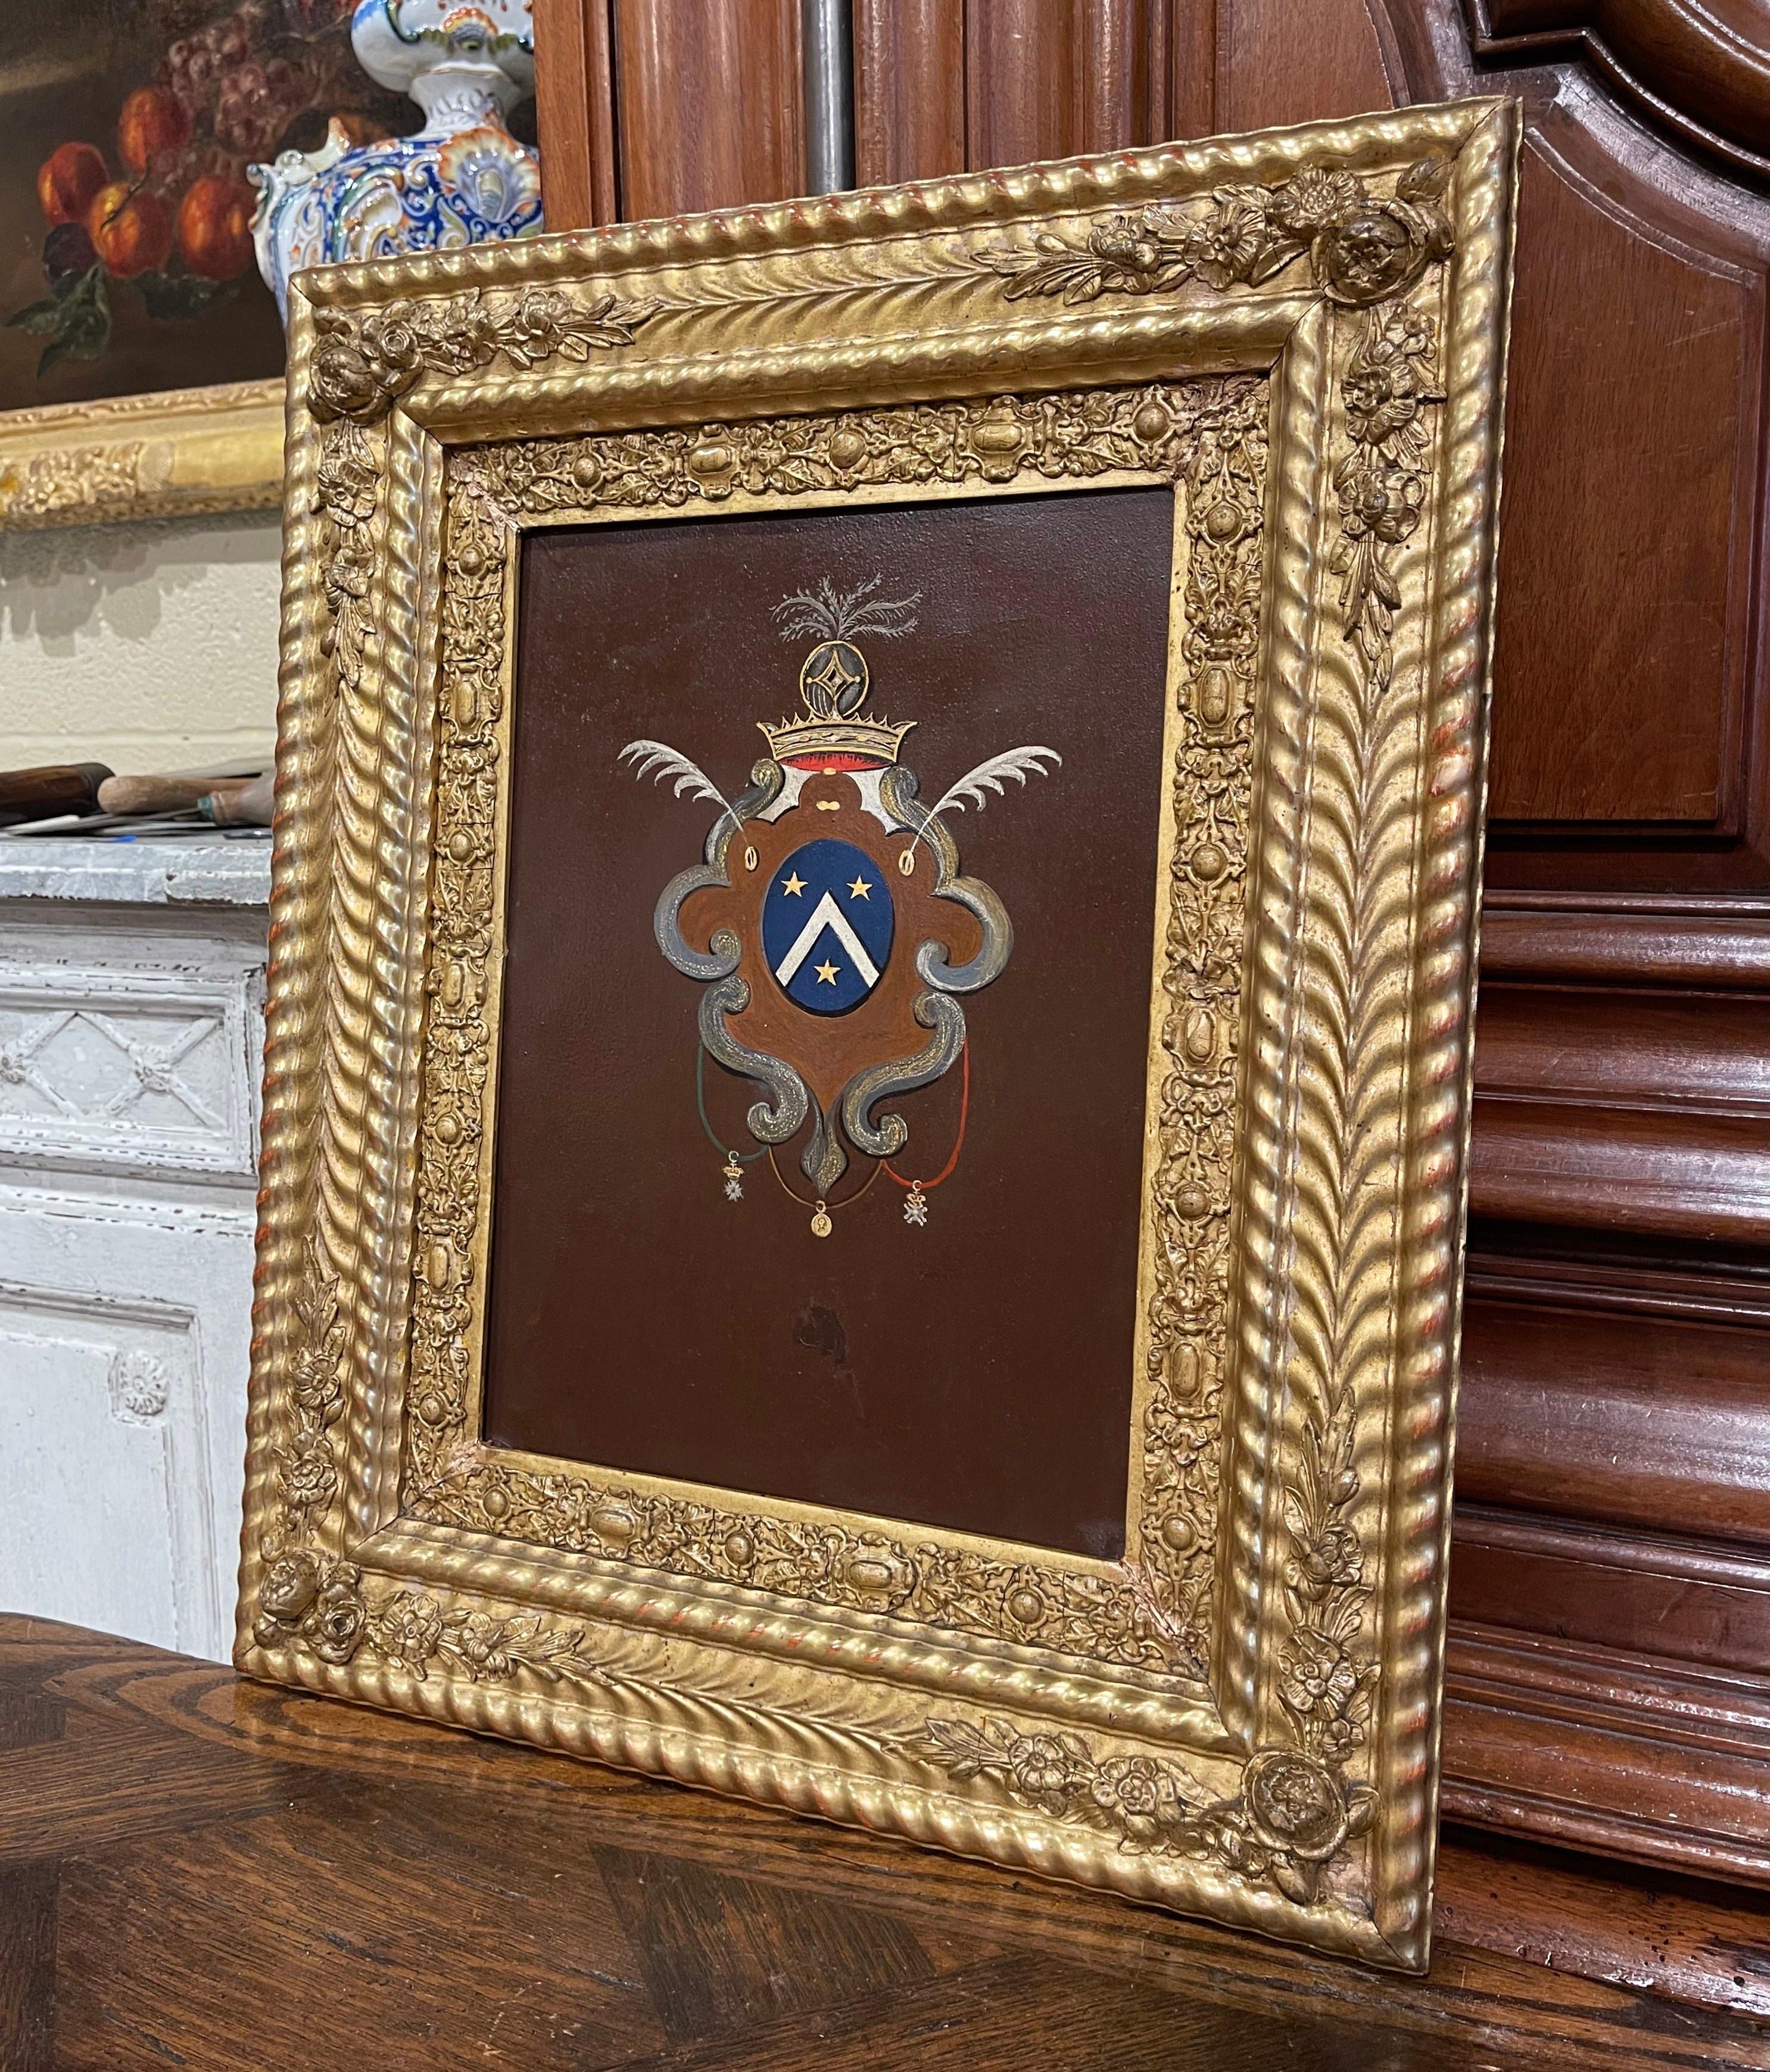 Decorate an office or study with this elegant antique wall decor. Crafted in France circa 1830, and set in the original carved gilt frame, the art work on metal features a hand painted family coat of arms embellished with a top crown, and